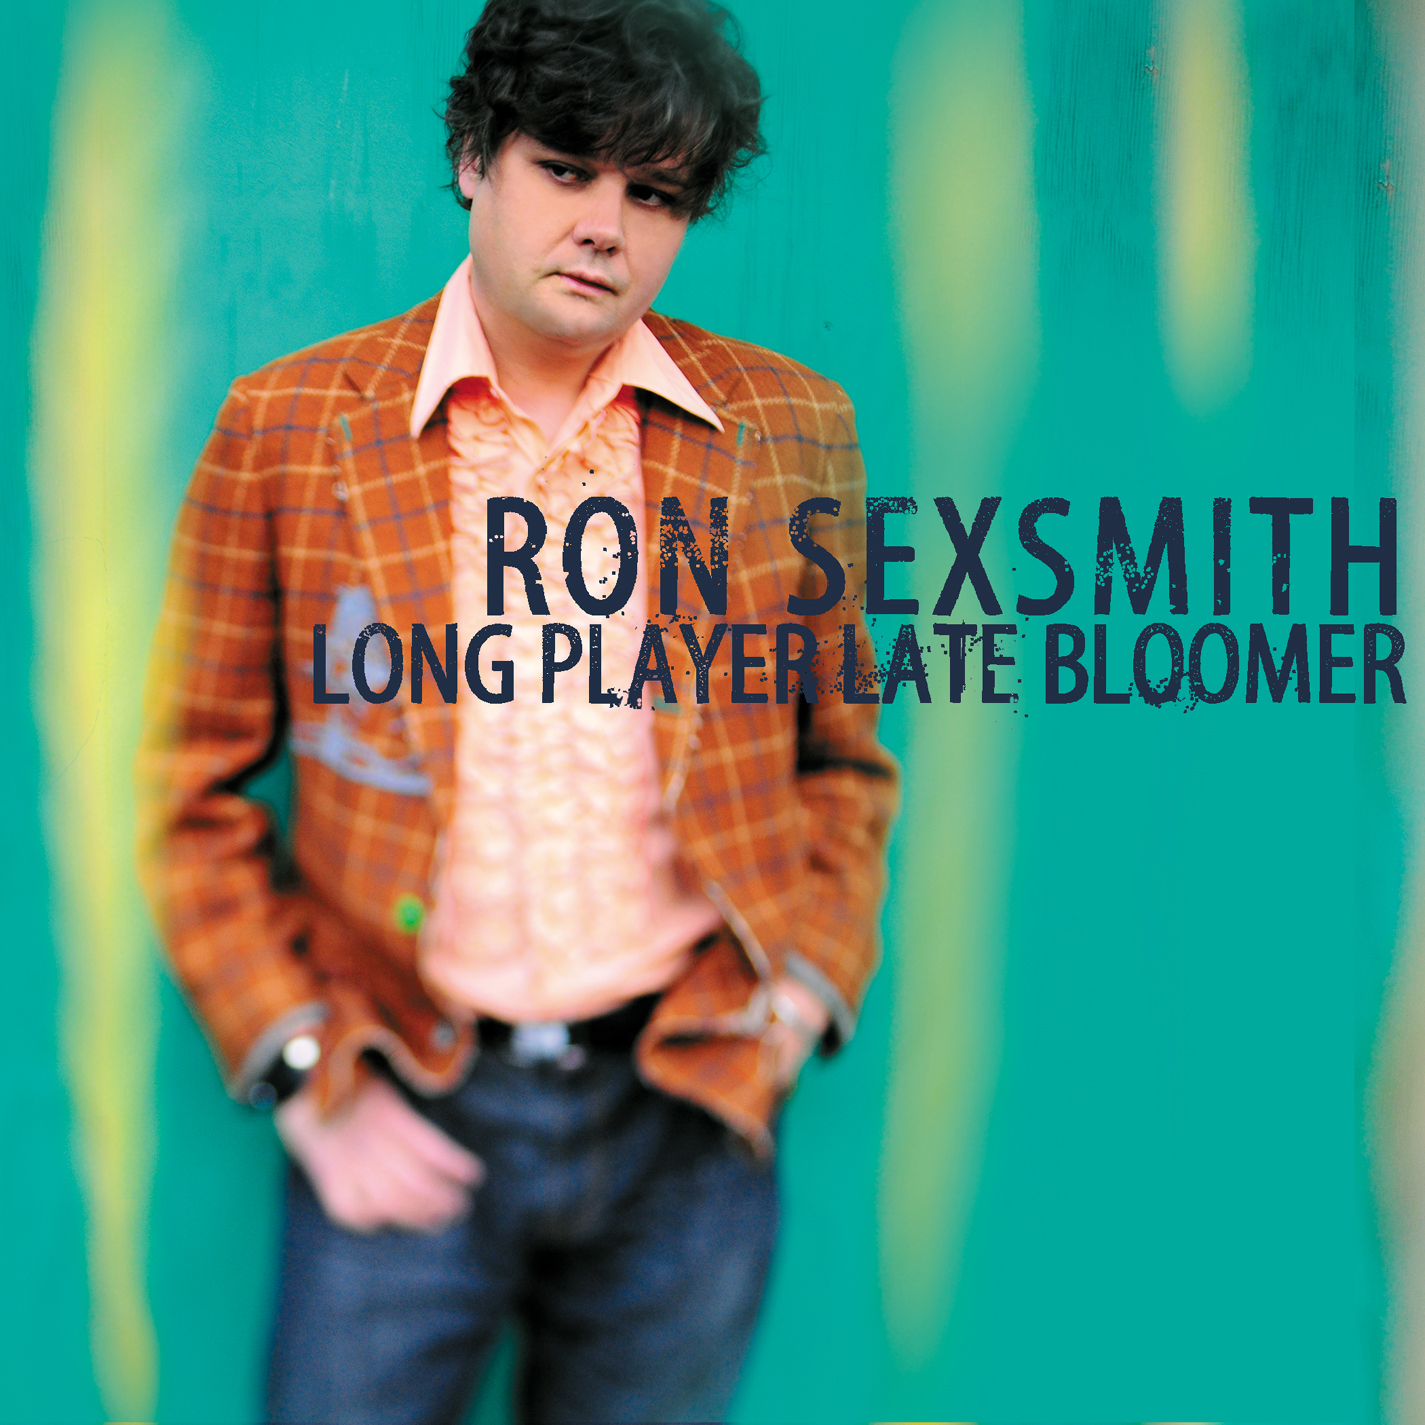 Ron Sexsmith: Long Player Late Bloomer